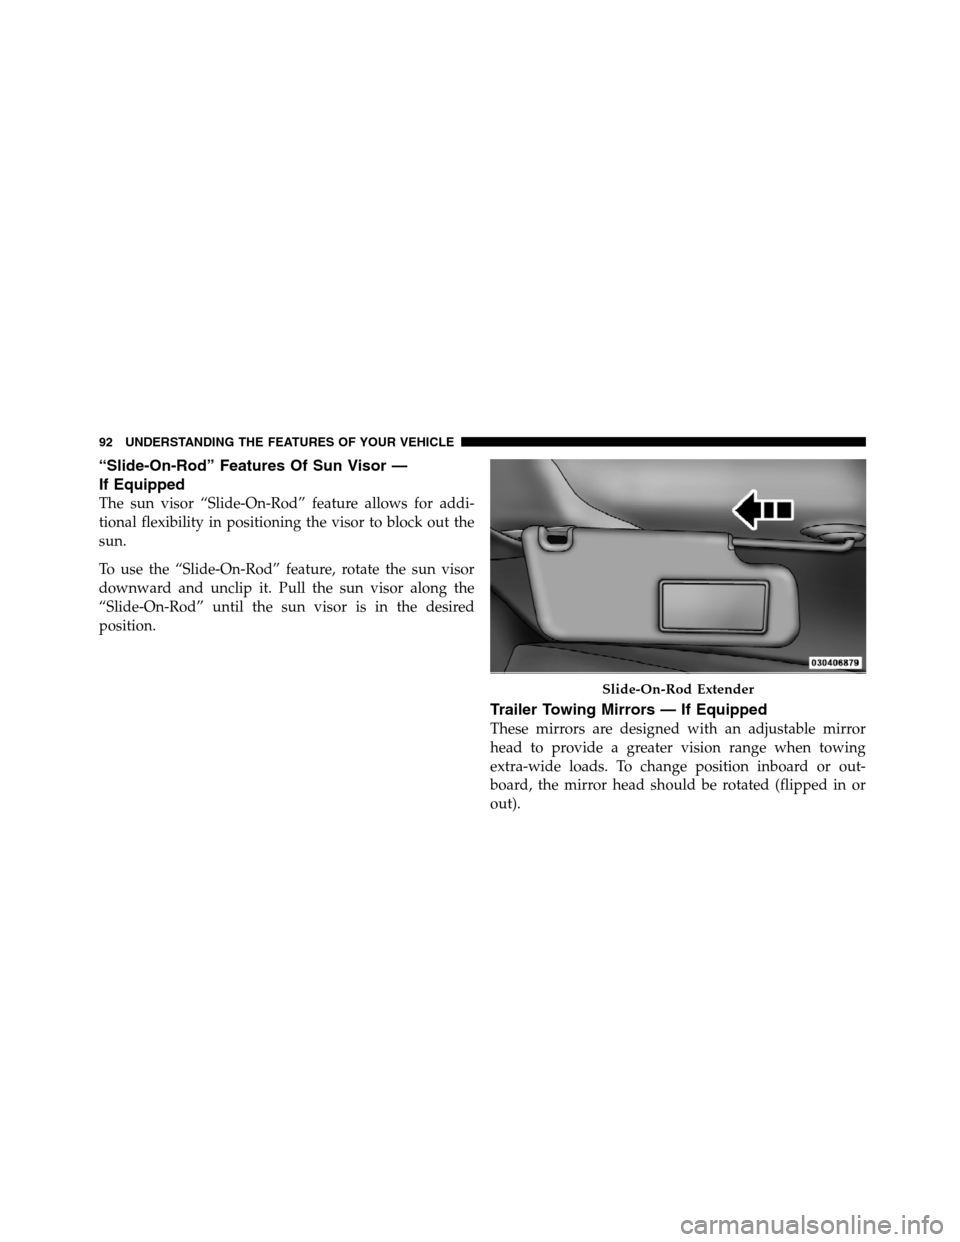 Ram 5500 Chassis Cab 2012  Owners Manual “Slide-On-Rod” Features Of Sun Visor —
If Equipped
The sun visor “Slide-On-Rod” feature allows for addi-
tional flexibility in positioning the visor to block out the
sun.
To use the “Slide